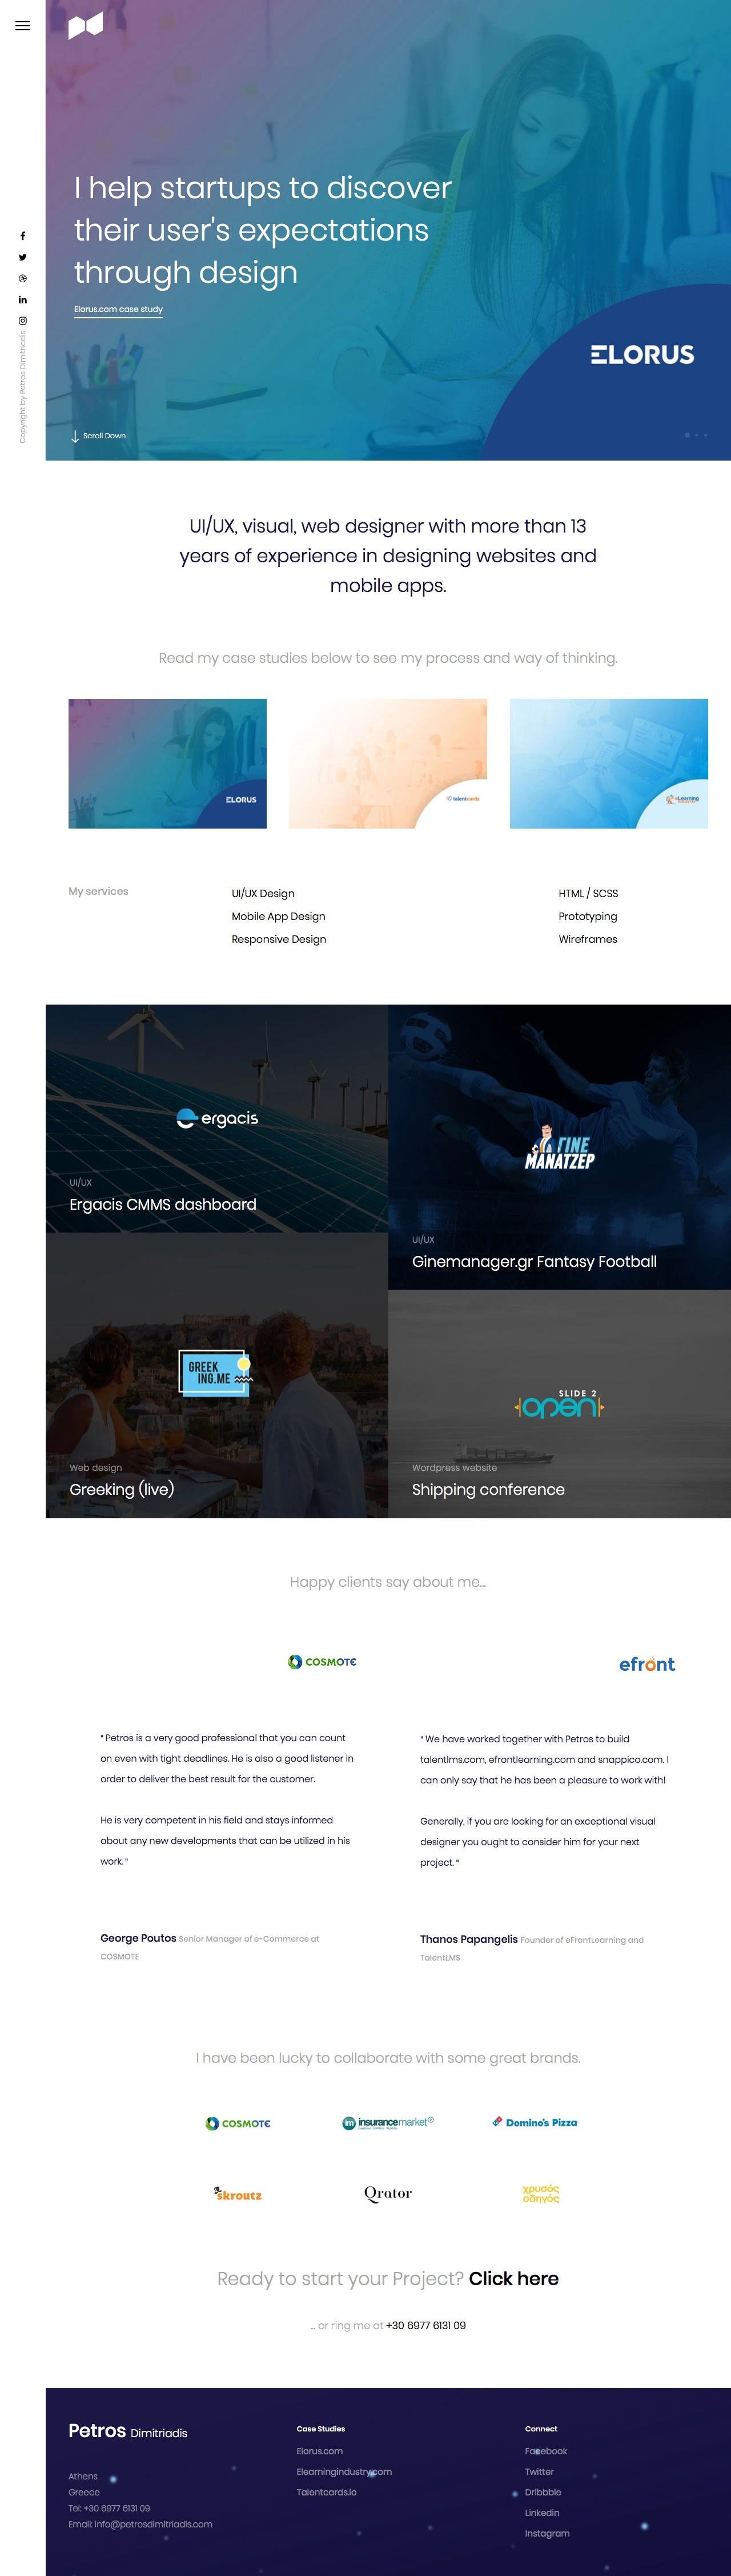 Petros Dimitriadis Landing Page Example: I help startups to discover their user's expectations through design